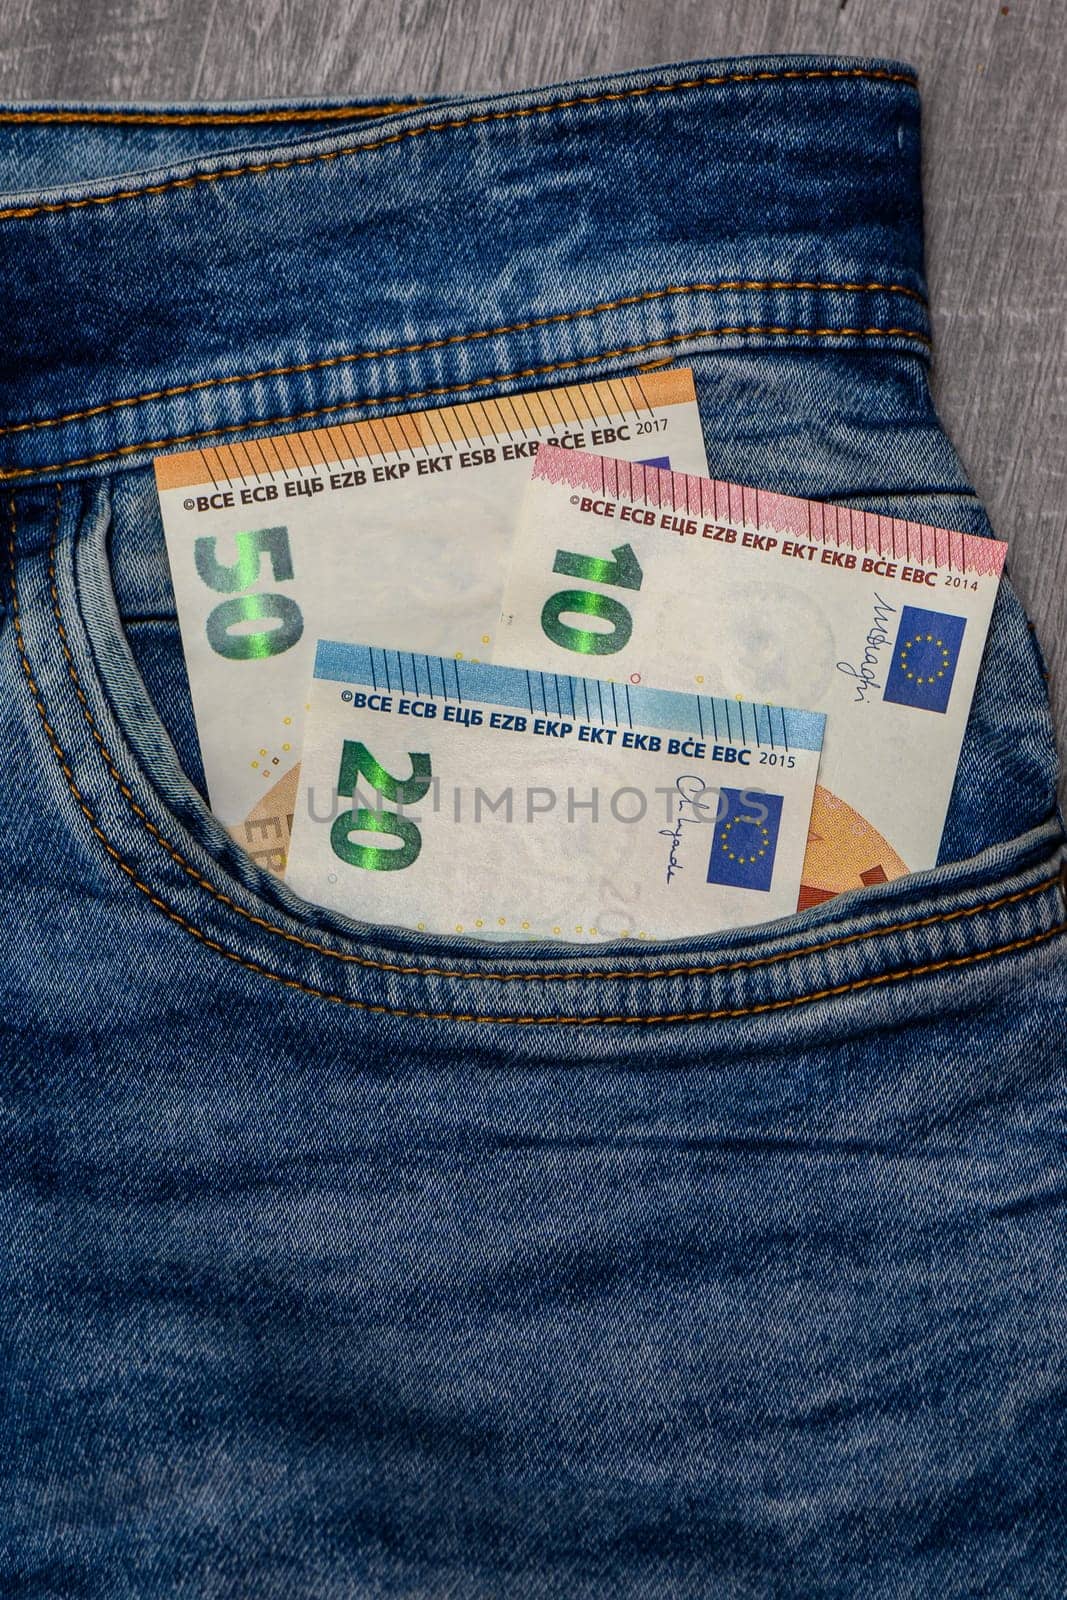 Euro bank notes in a demin jeans pocket by Mixa74